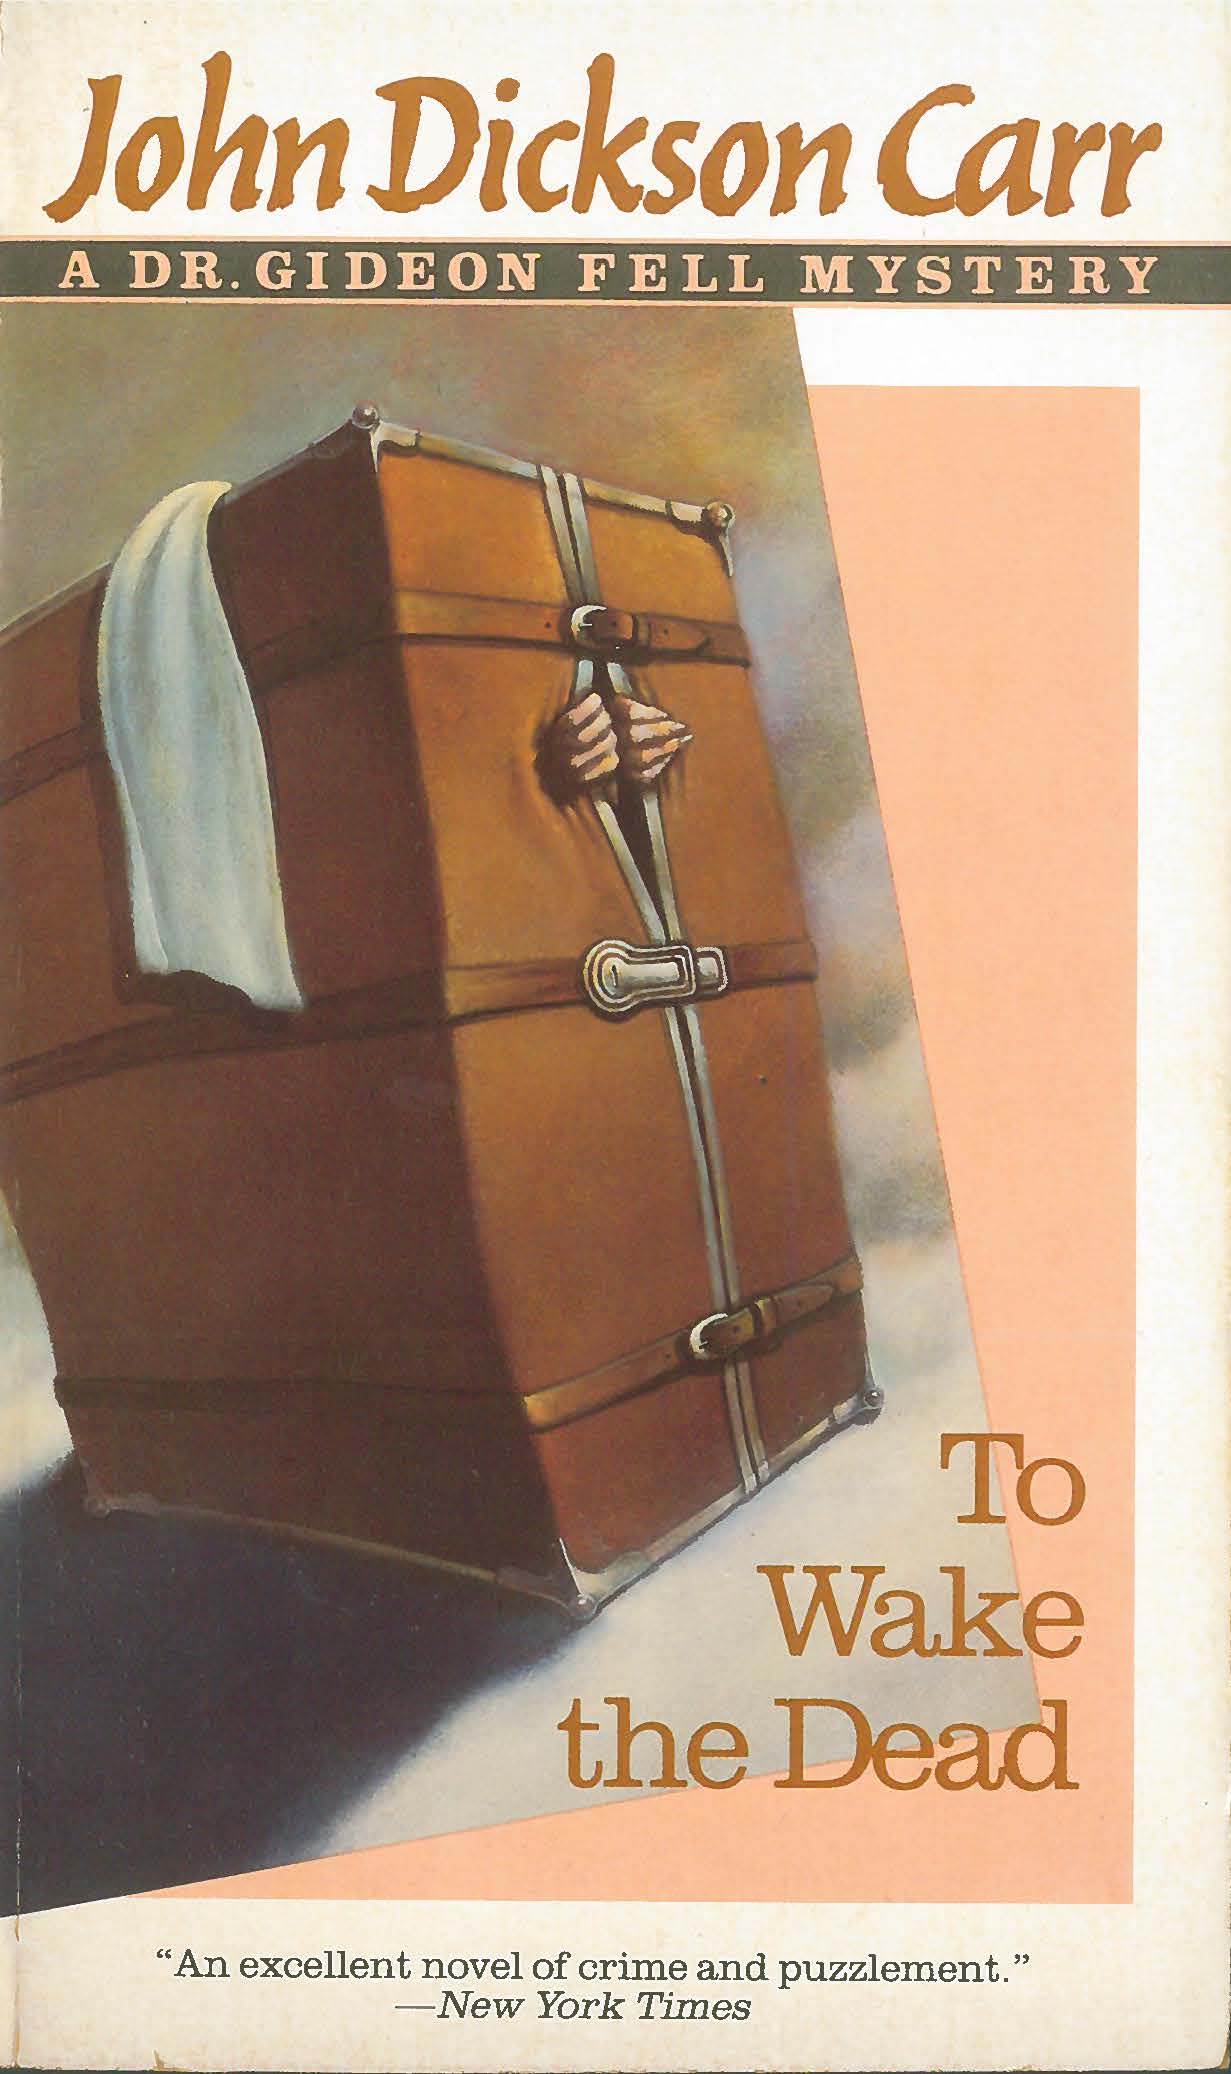 To Wake The Dead